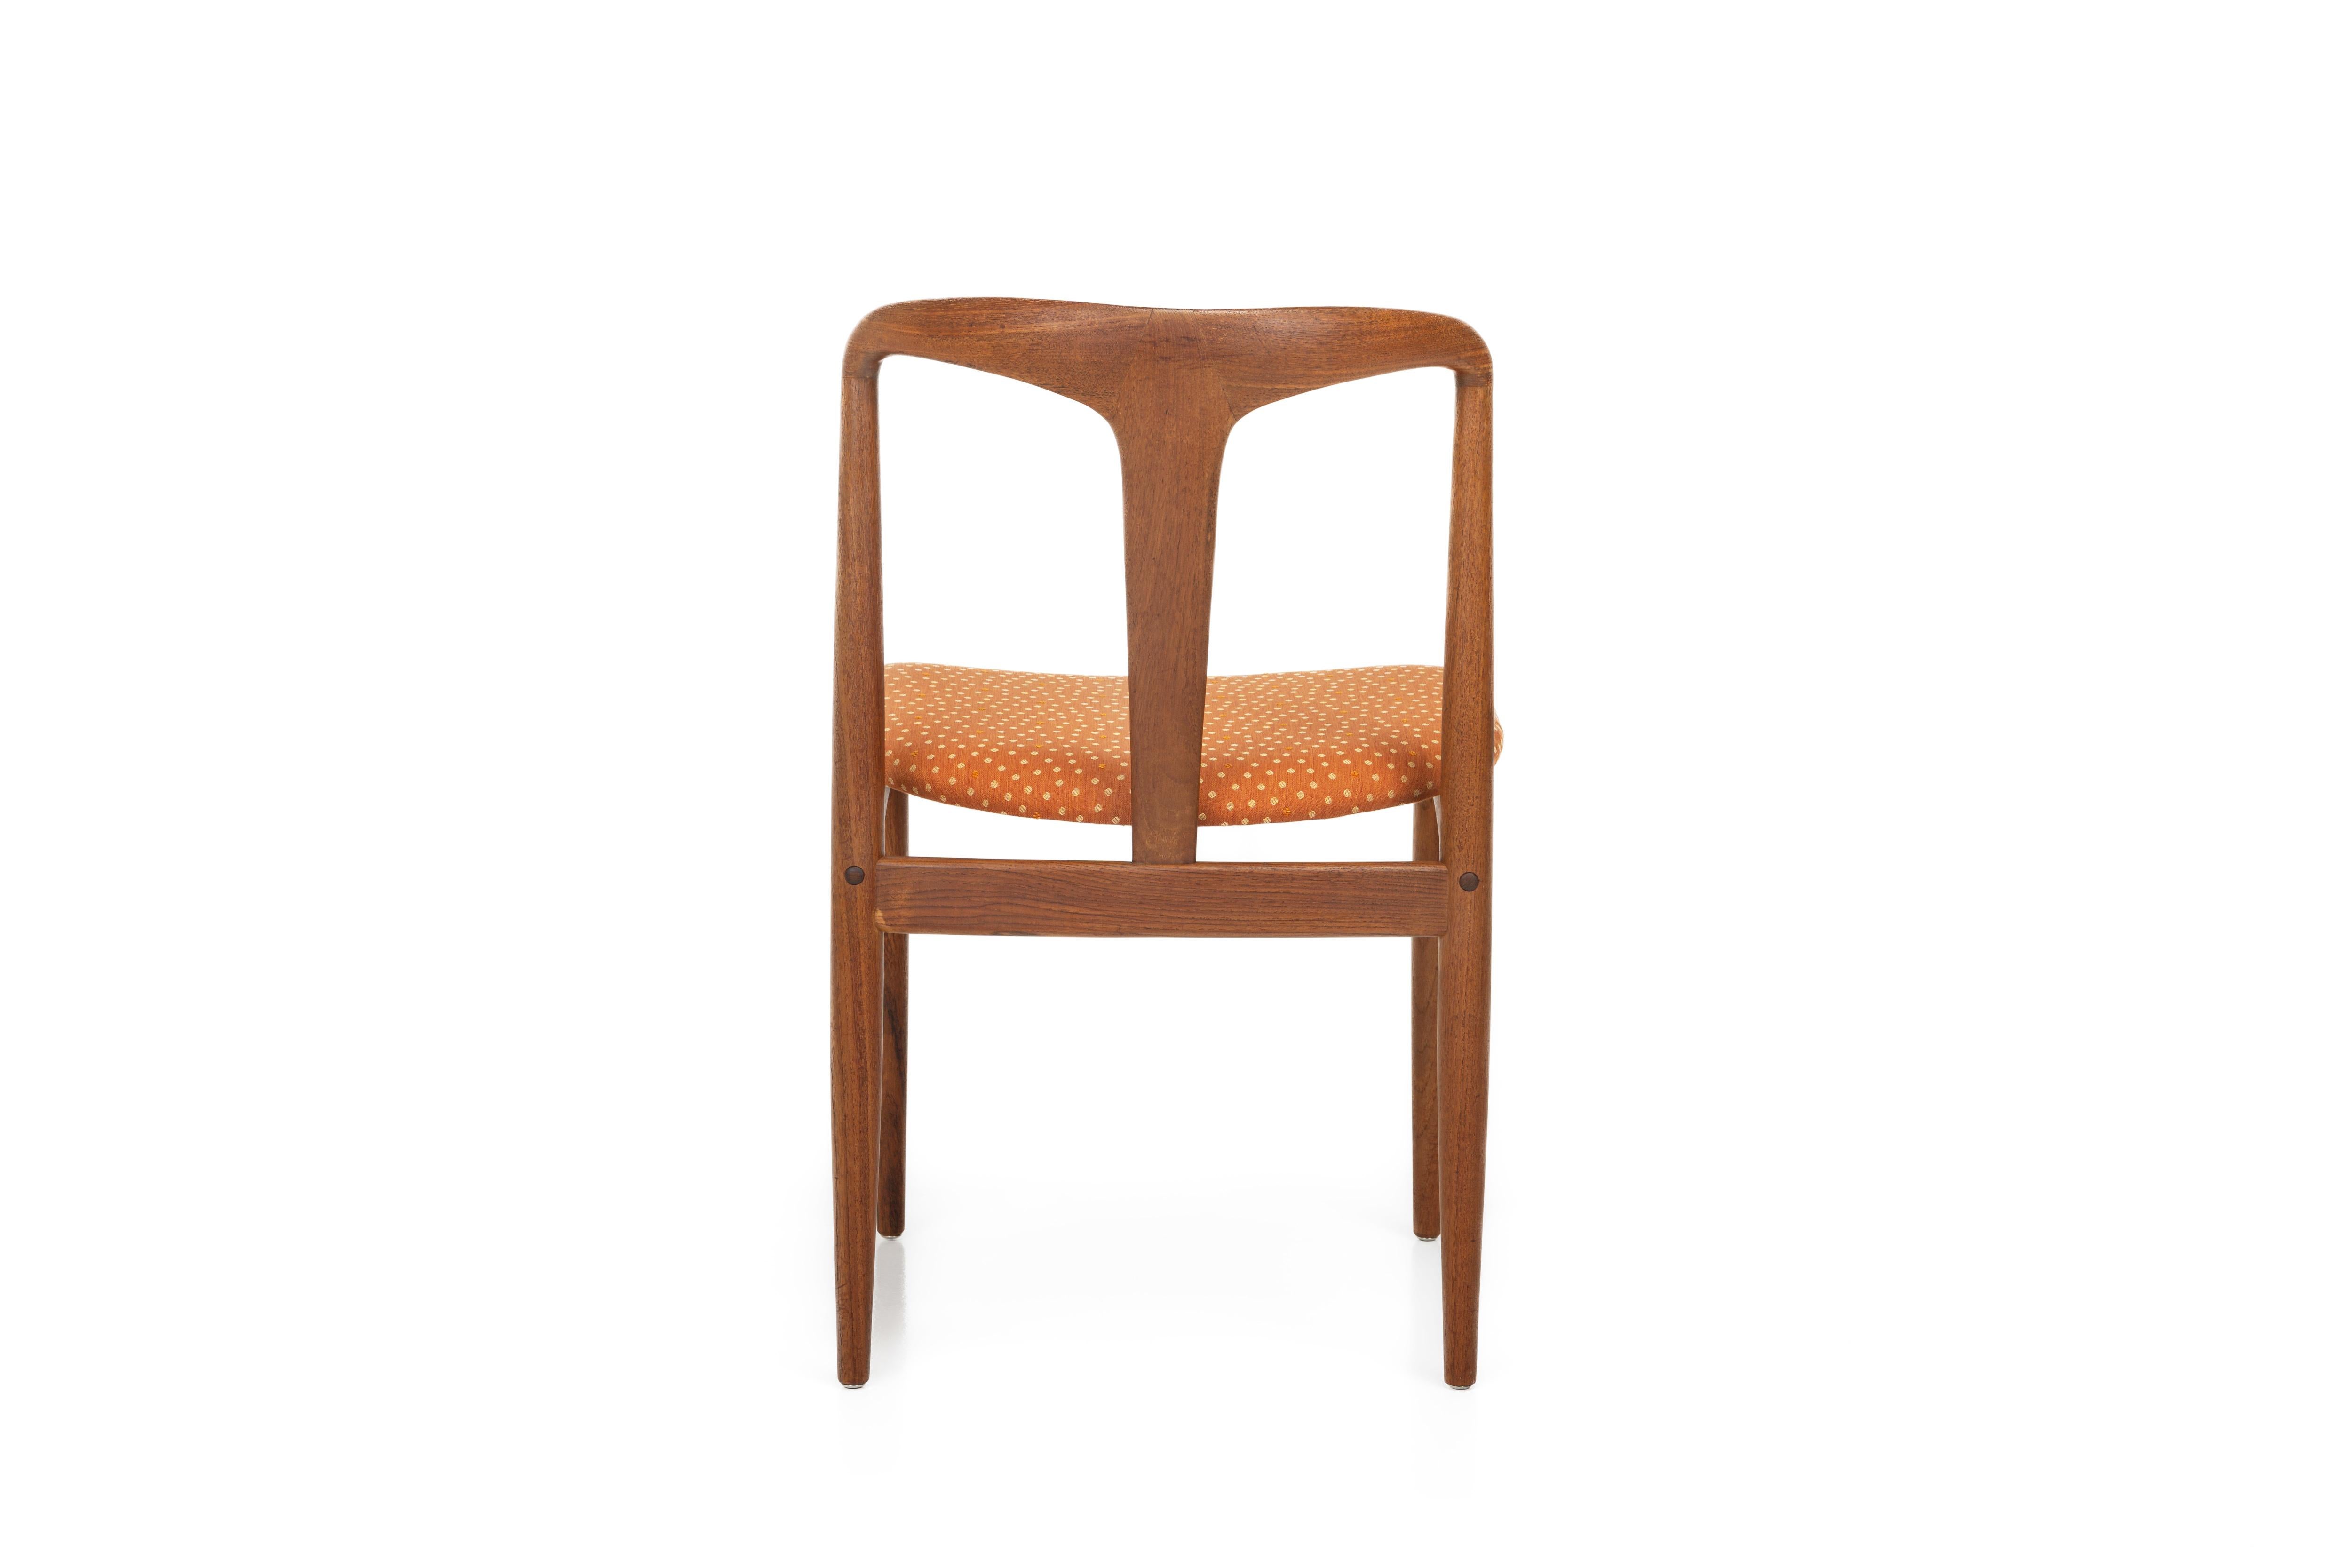 Set of 6 dining chairs by Johannes Andersen for Uldum Møbelfabrik in Denmark 196 For Sale 4